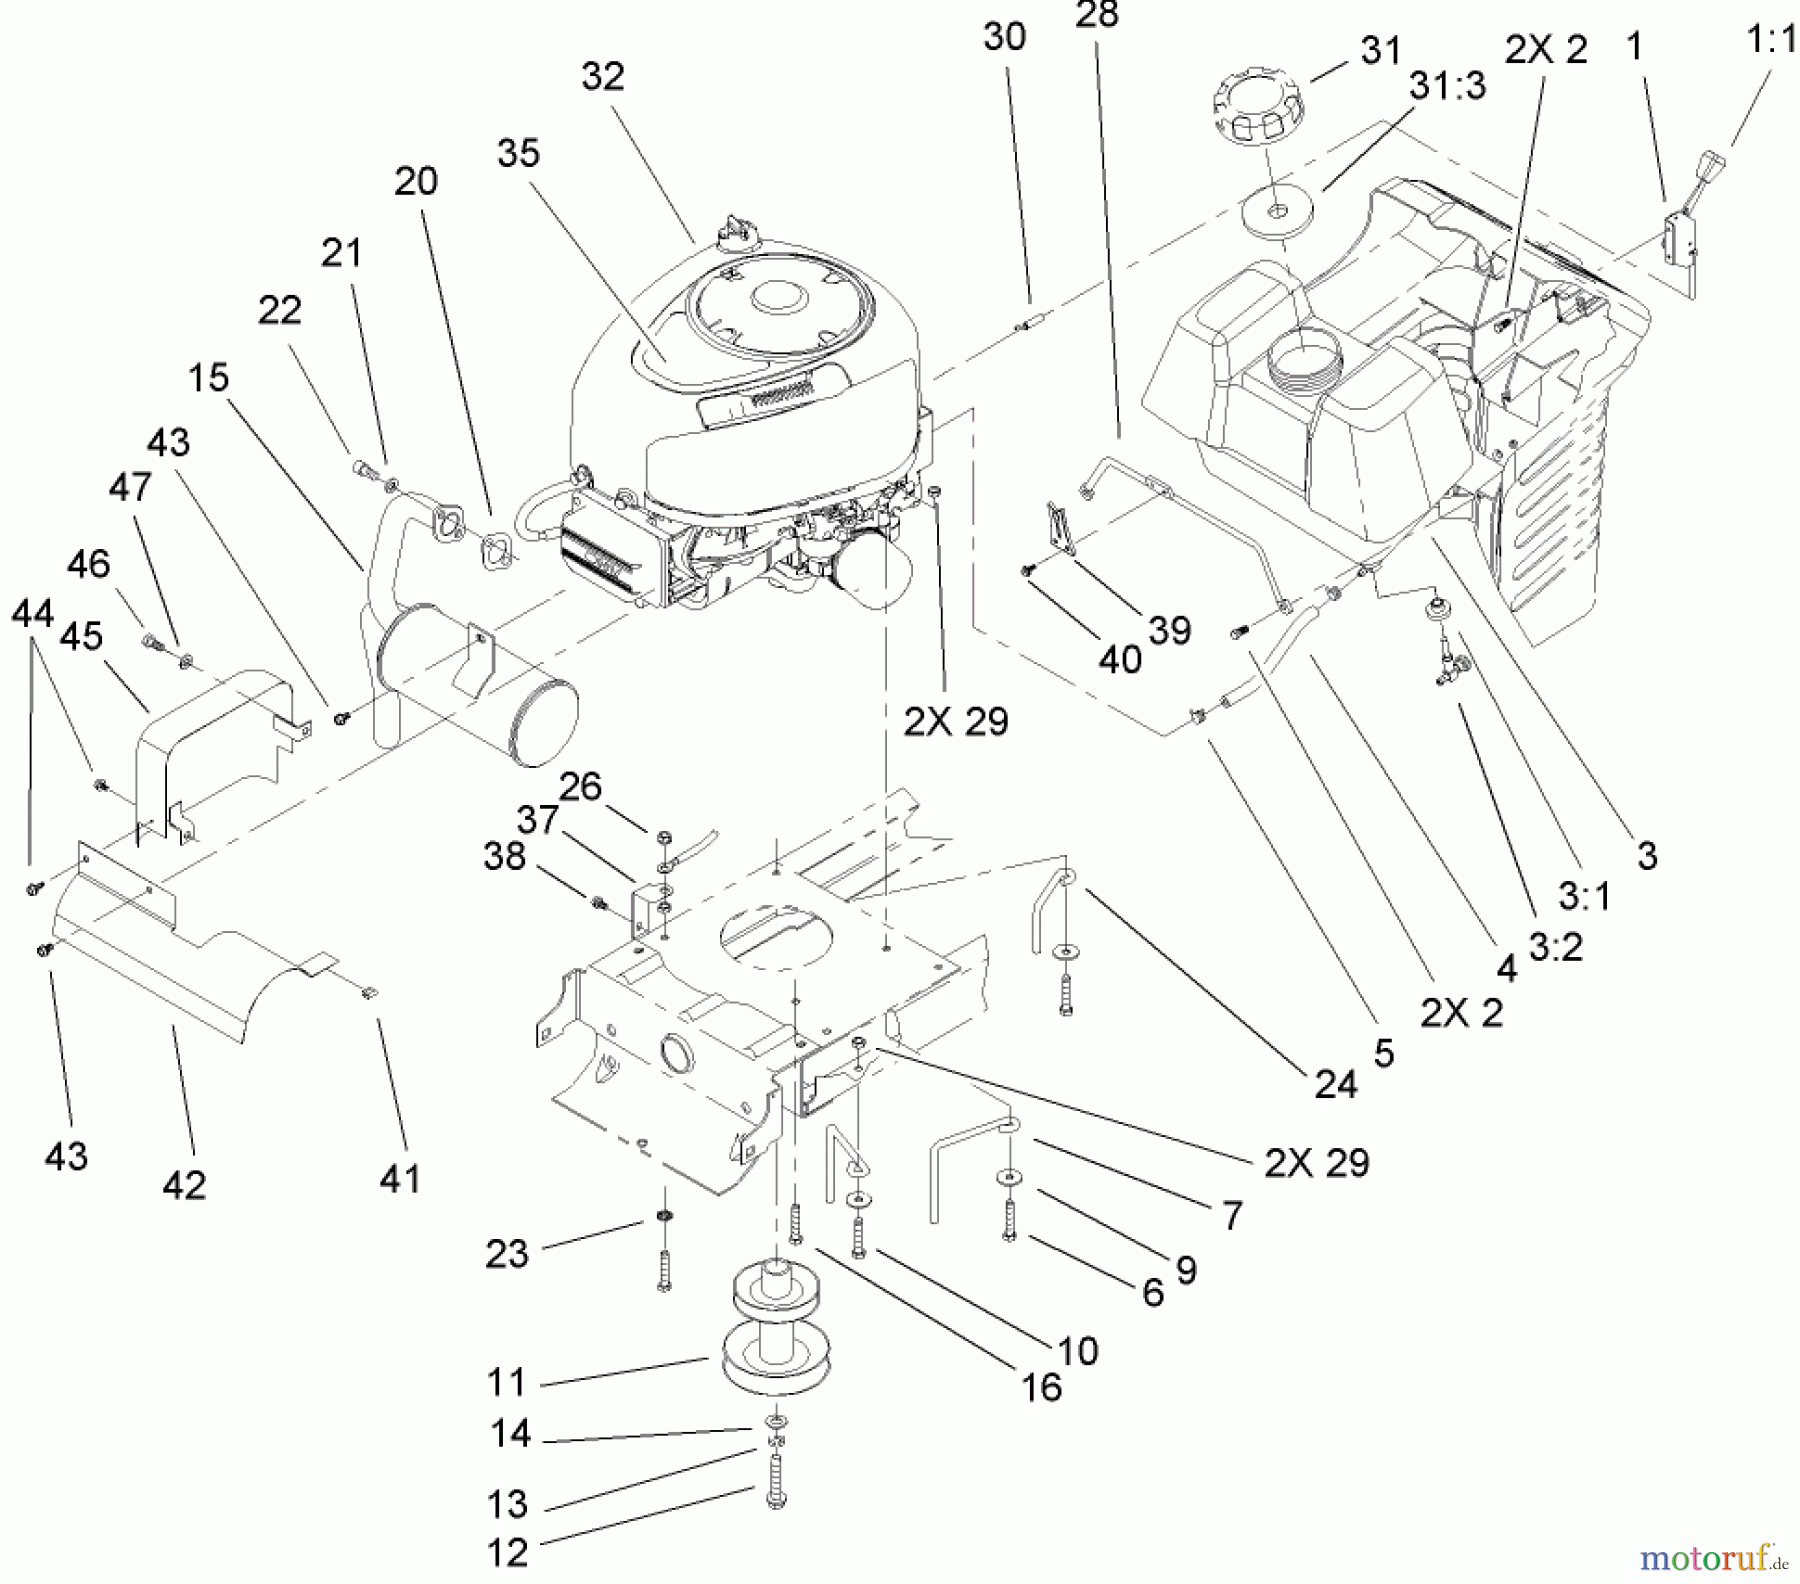  Toro Neu Mowers, Lawn & Garden Tractor Seite 1 71223 (16-38XL) - Toro 16-38XL Lawn Tractor, 2004 (240000001-240999999) ENGINE SYSTEM COMPONENT ASSEMBLY